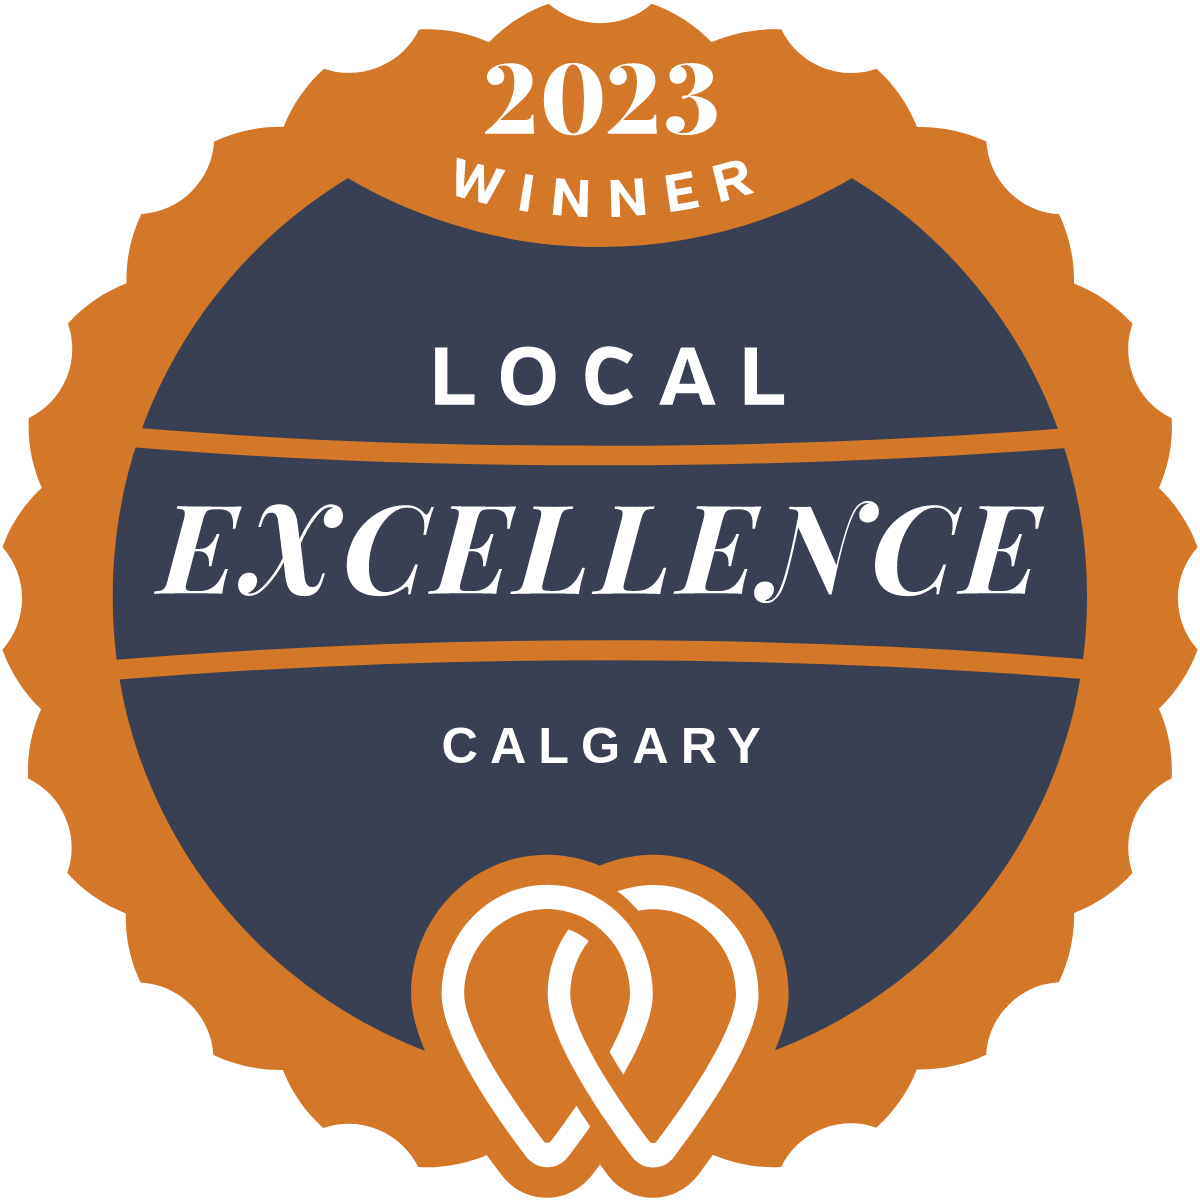 Local Excellence Calgary - 2023 Winner UpCity